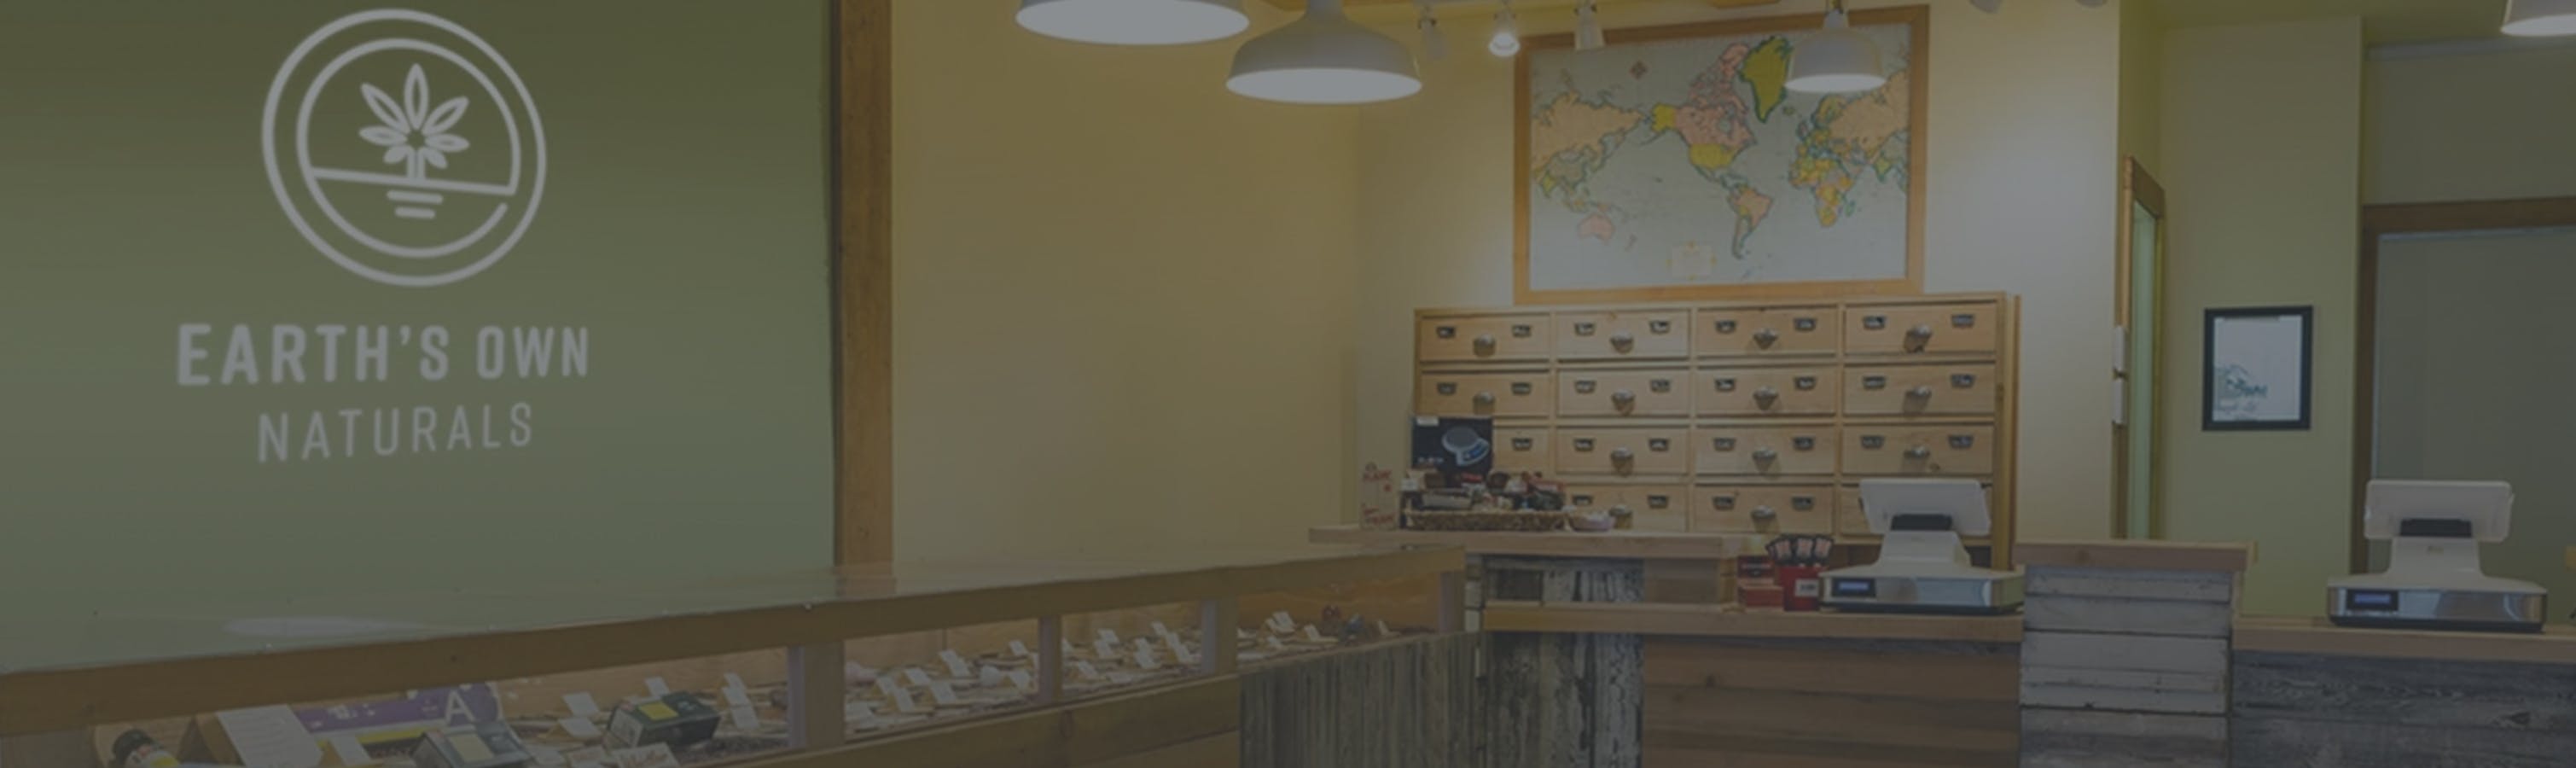 Cannabis Store Earth's Own Naturals - Kimberley  - 0